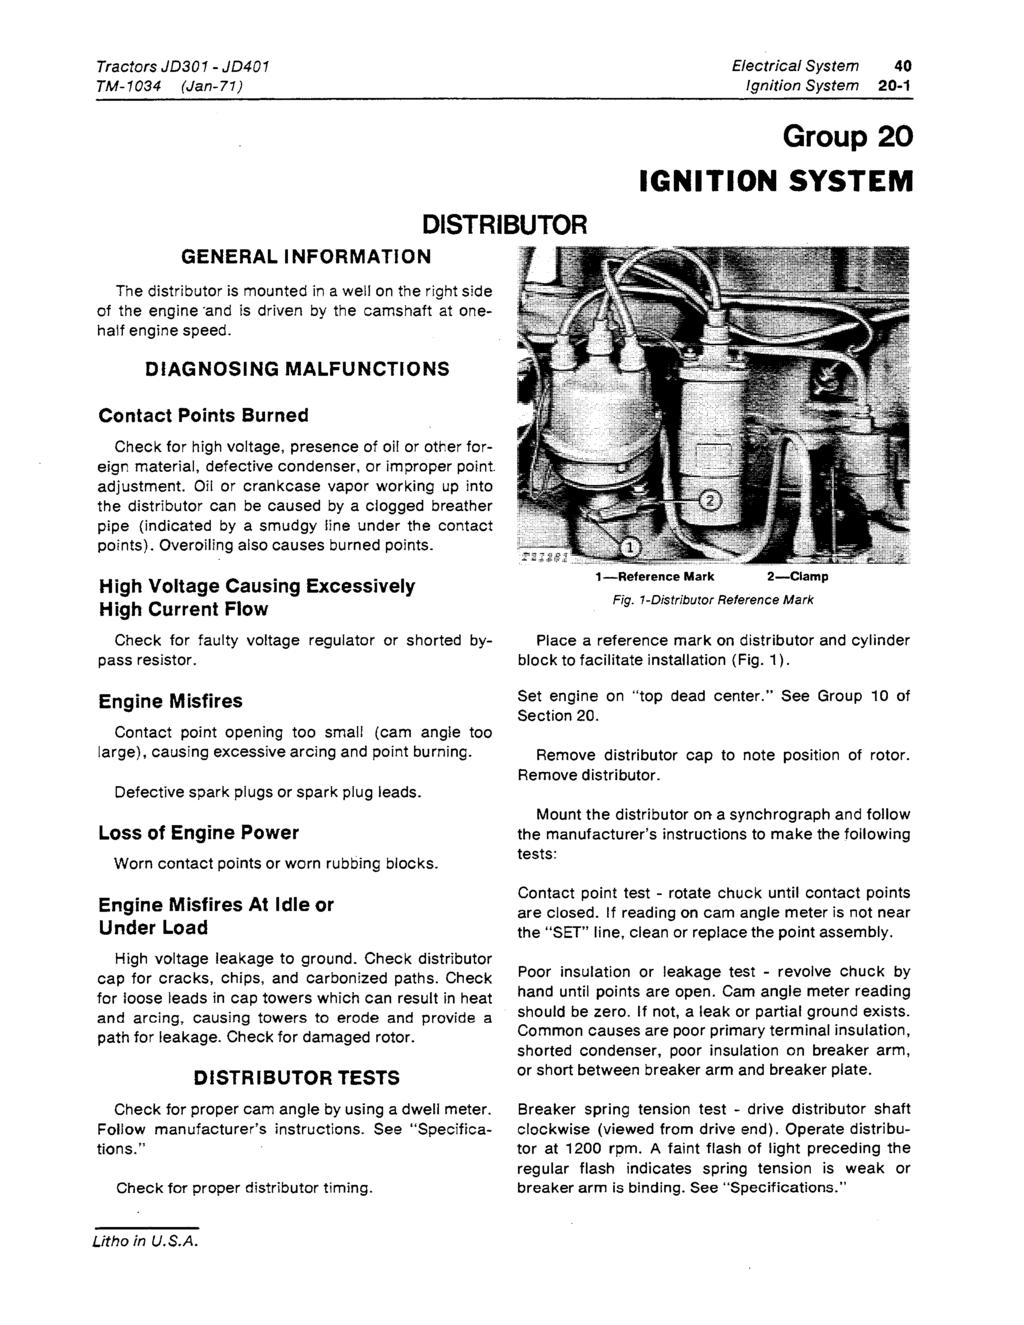 TM-1034 (Jan-71) Electrical System 40 Ignition System 20-1 Group 20 IGNITION SYSTEM GENERAL INFORMATION The distributor is mounted in a well on the right side of the engine 'and is driven by the